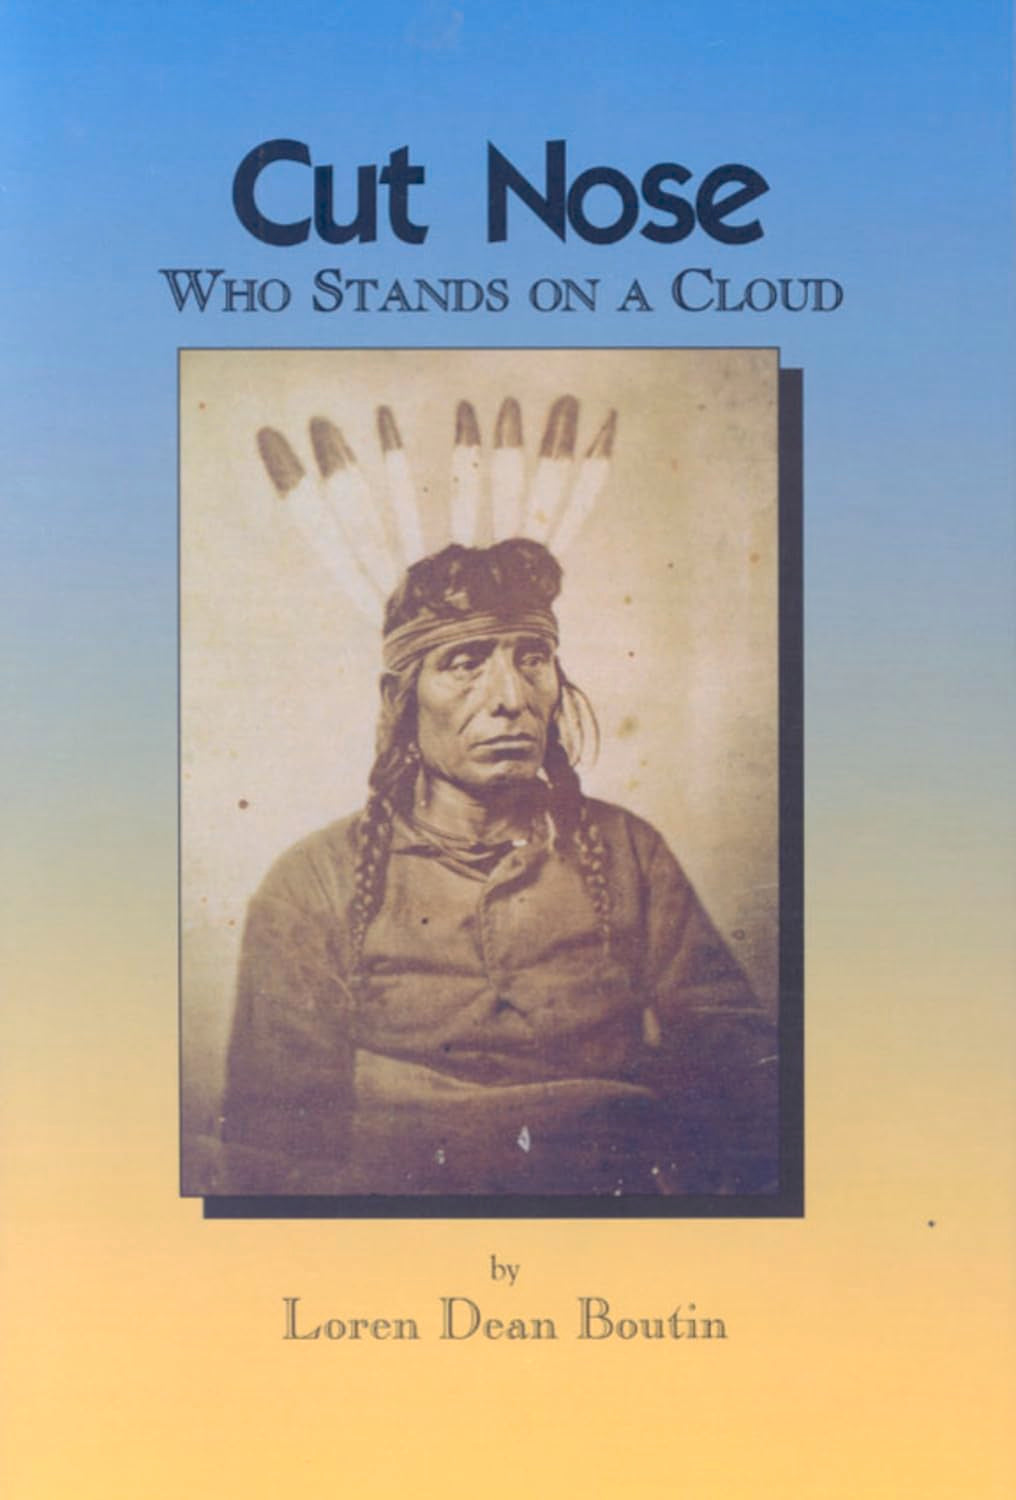 Cut Nose: Who Stands on a Cloud